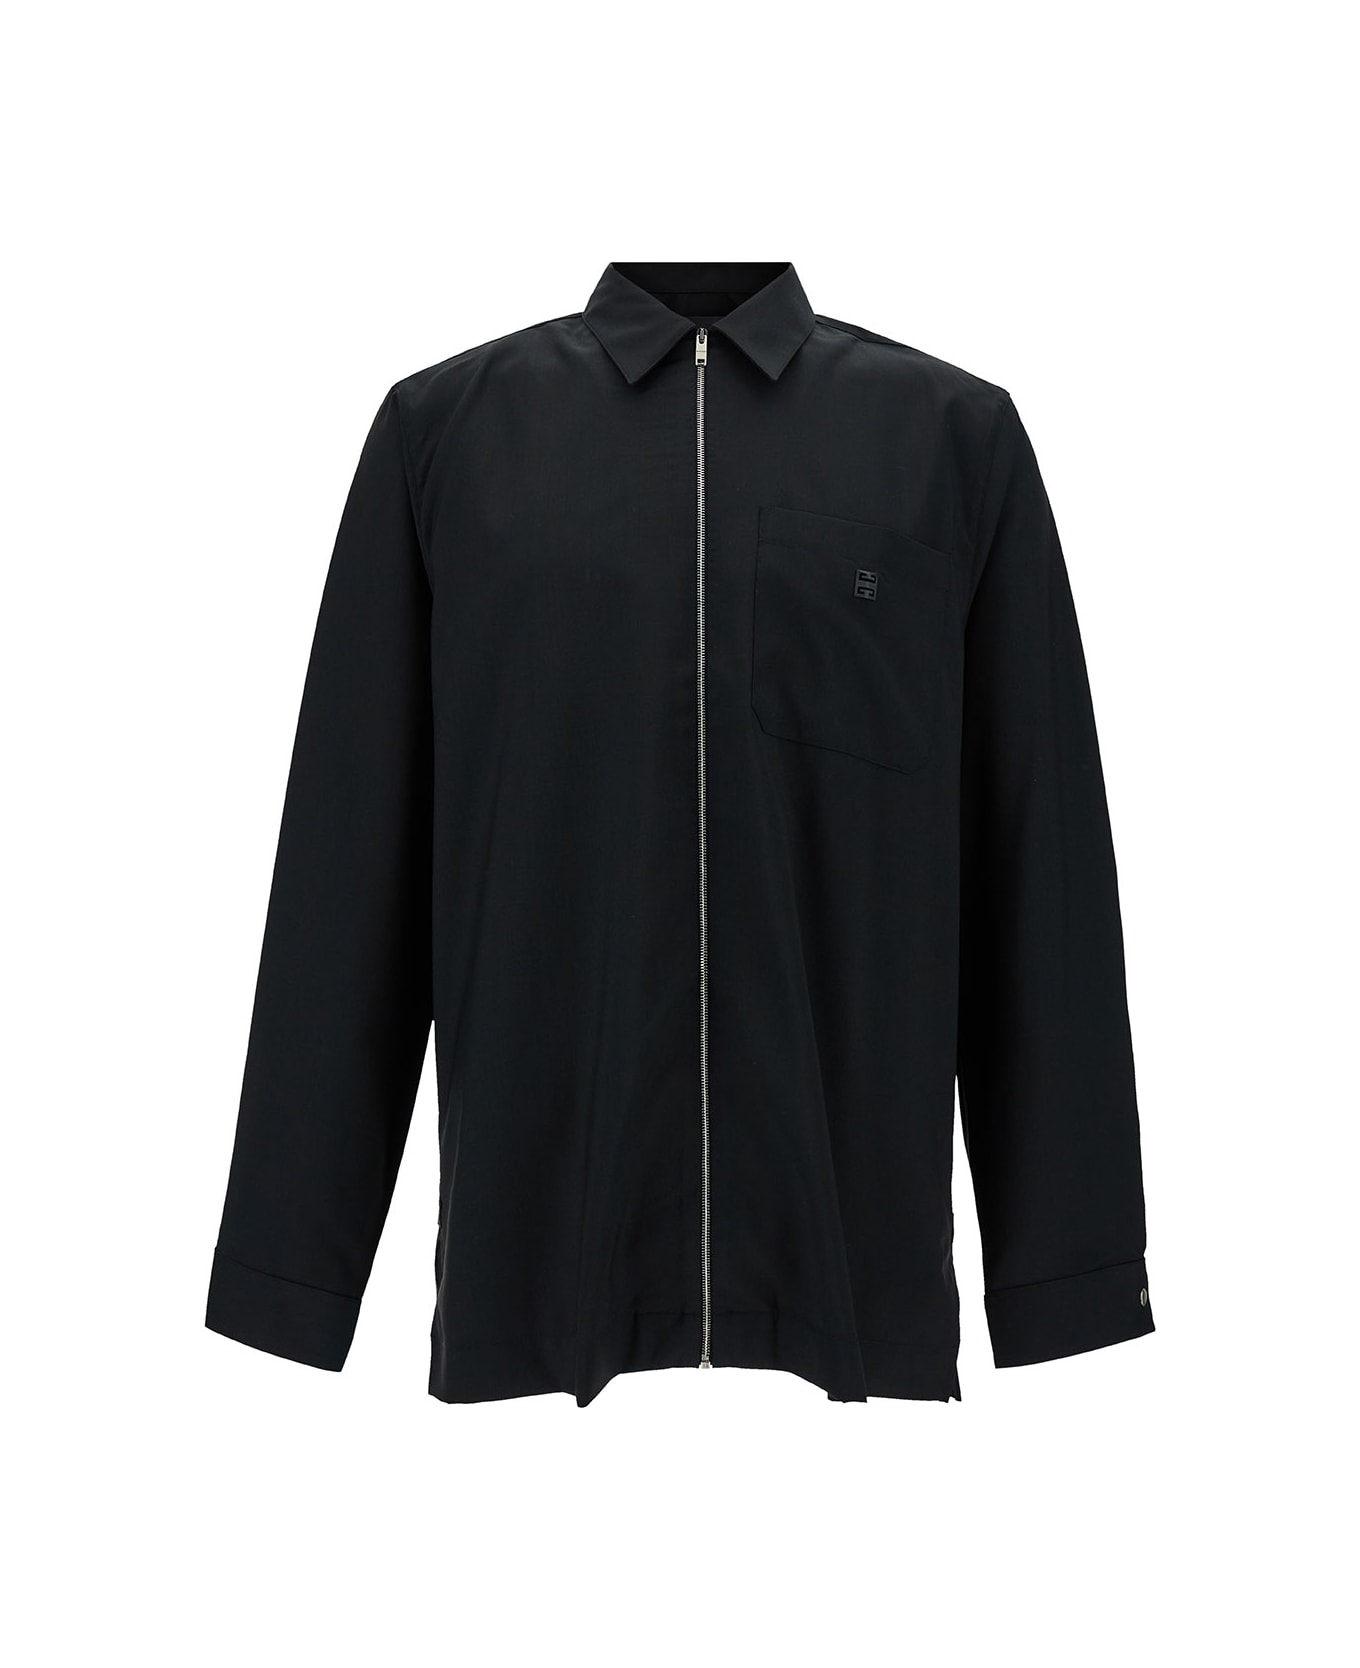 Givenchy Jackor Black Shirt With Zip Cloknit And 4g Logo In Wool Man - Black